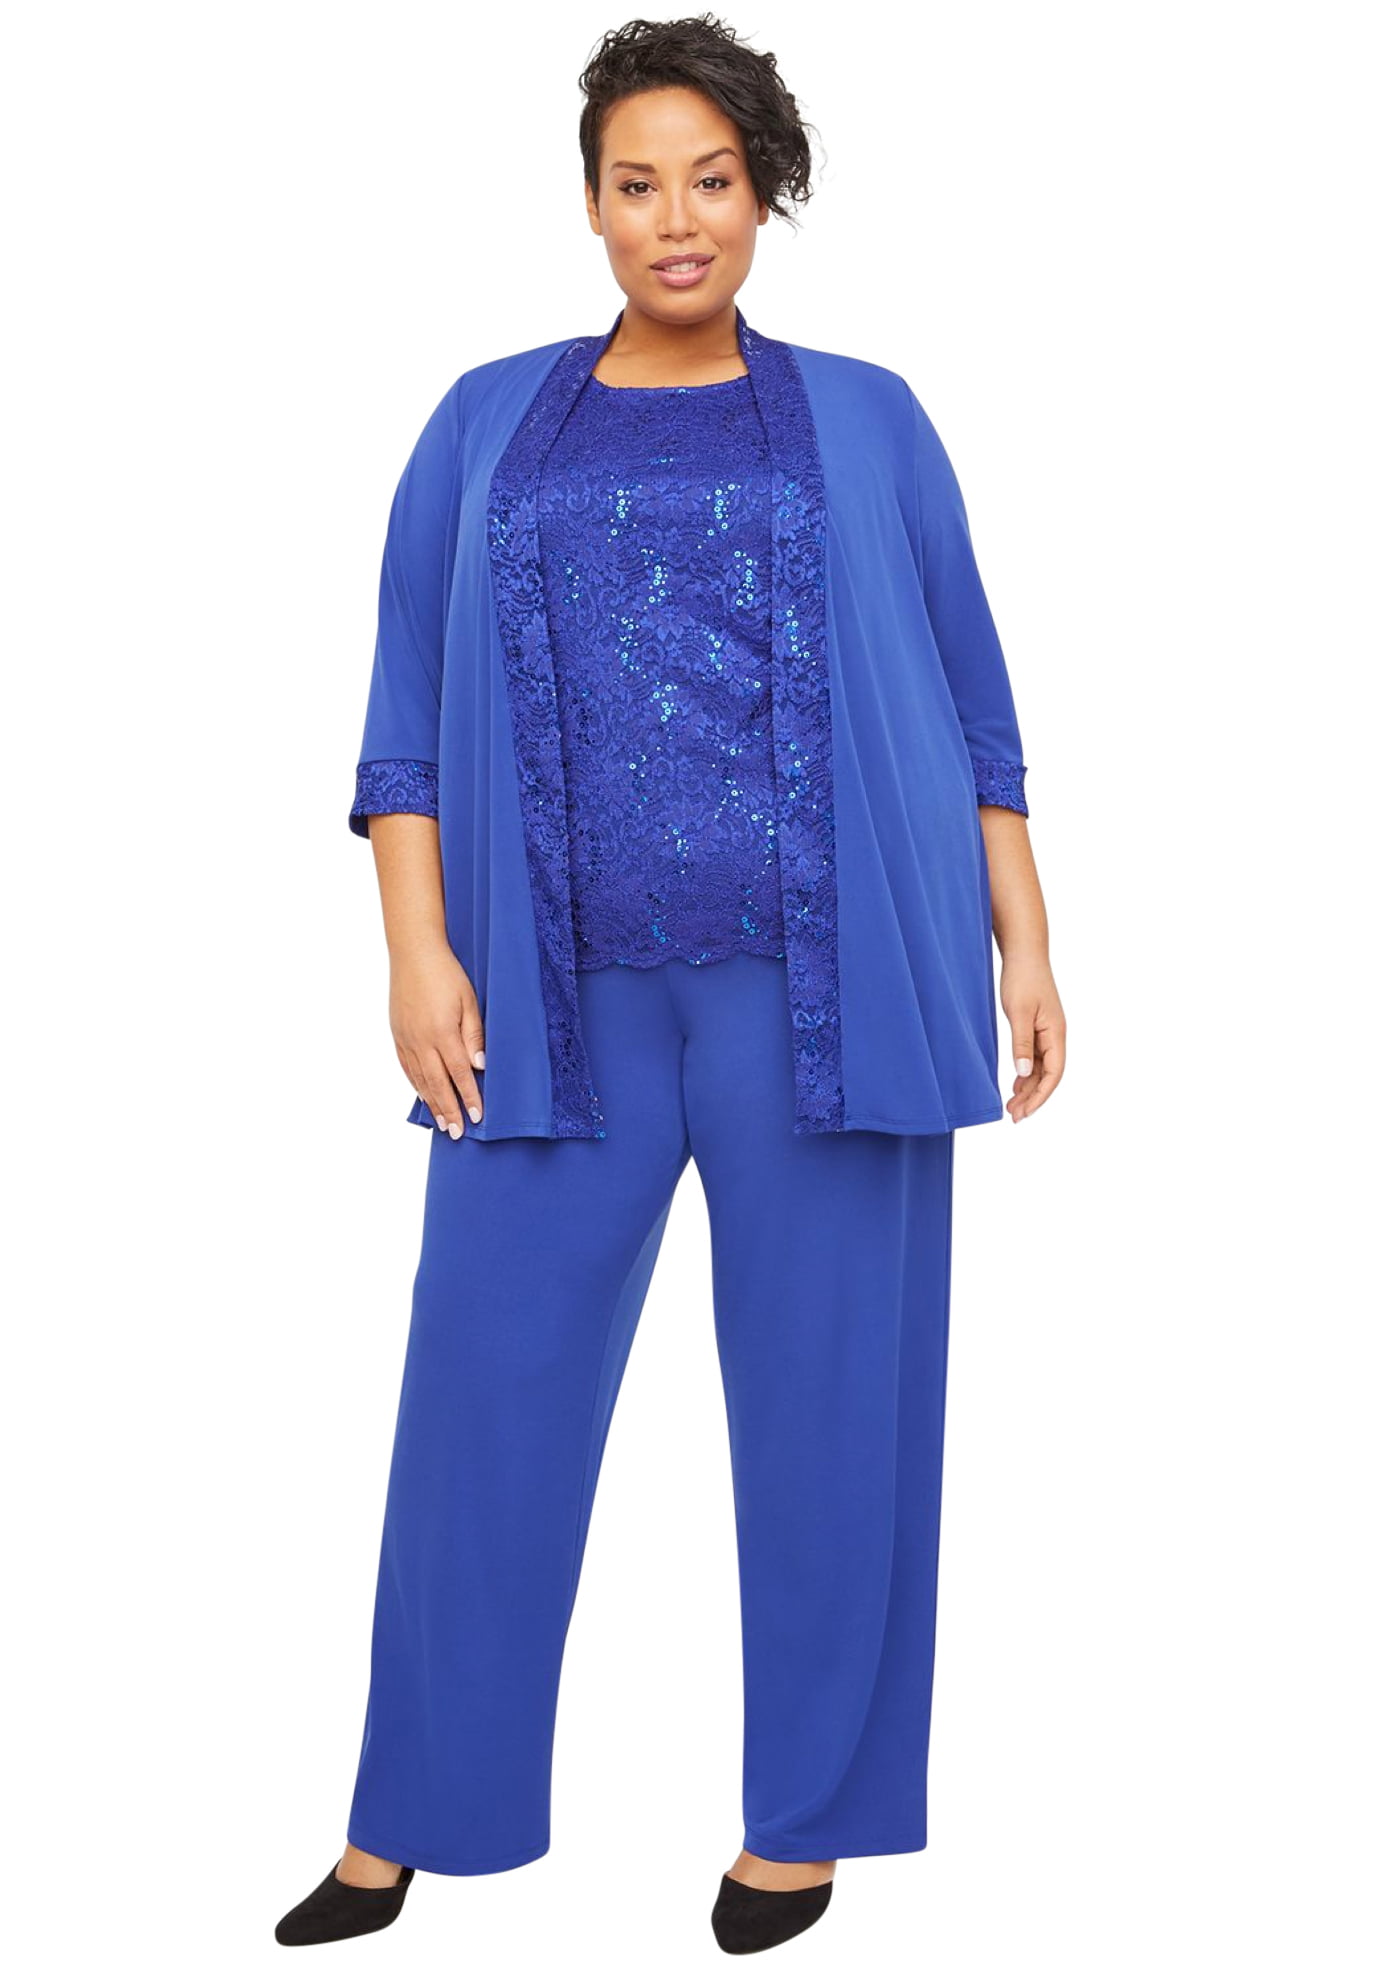 Update more than 152 royal blue trouser suit latest - camera.edu.vn